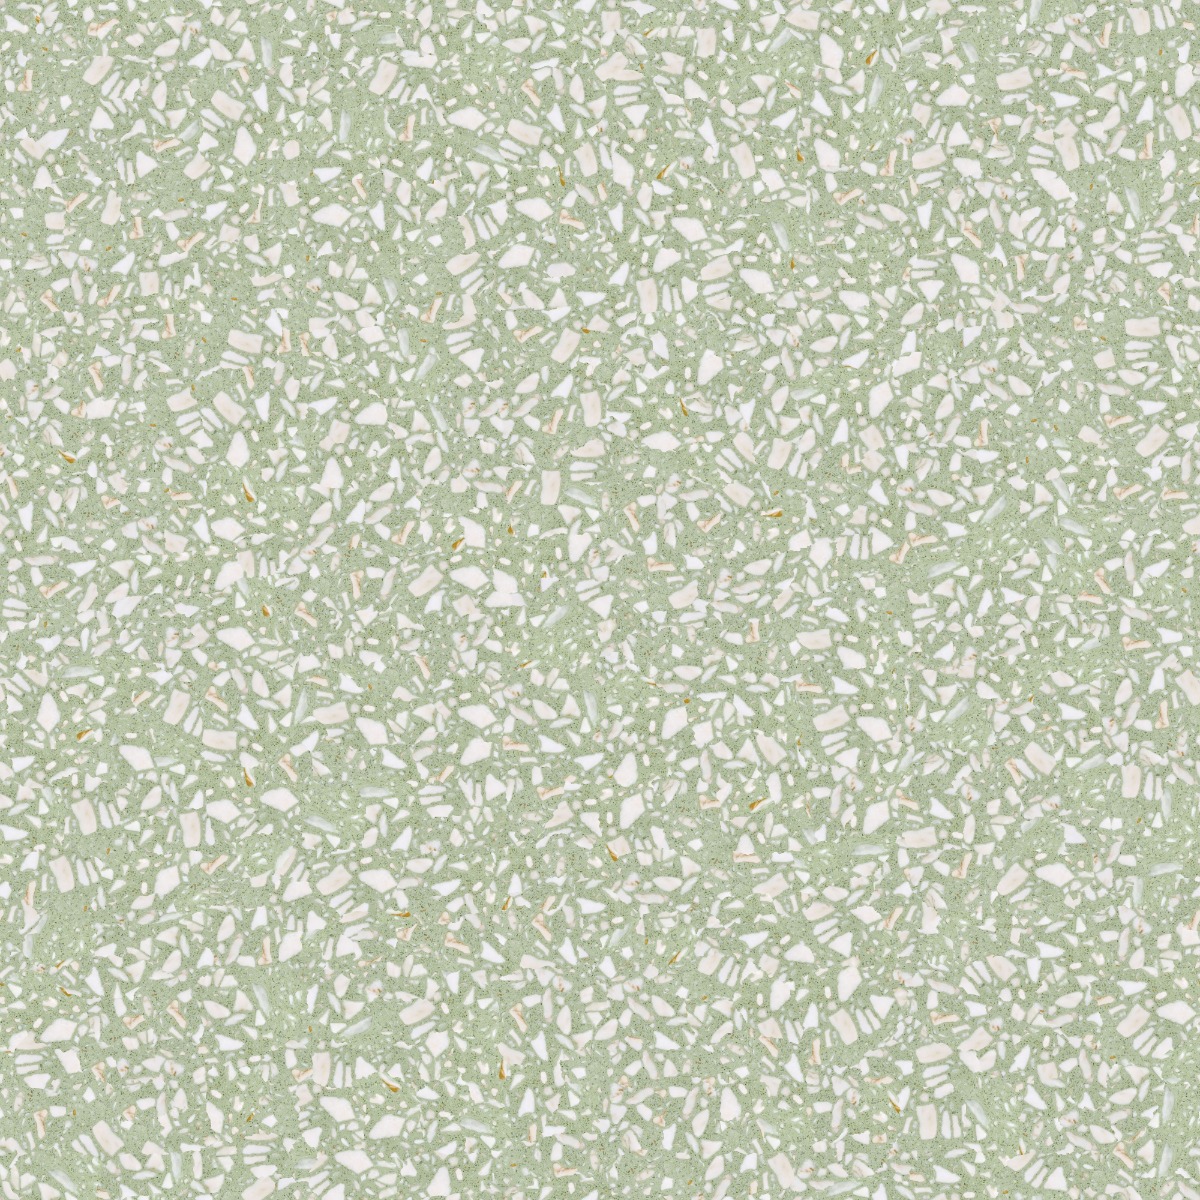 A seamless terrazzo texture with egr verde estremoz terrazzo units arranged in a None pattern